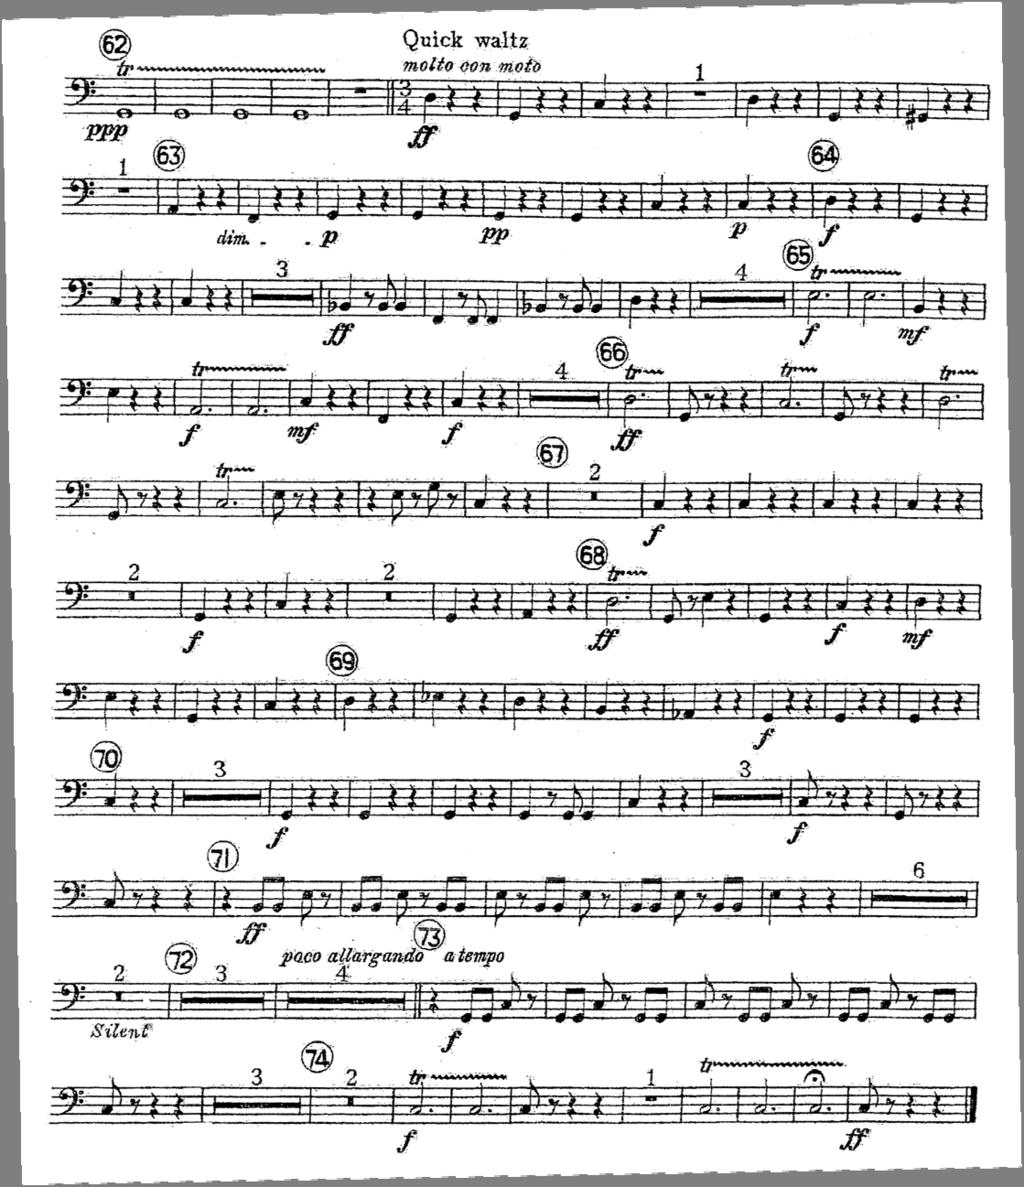 TIMPANI EXCERPTS CONTINUED 47)